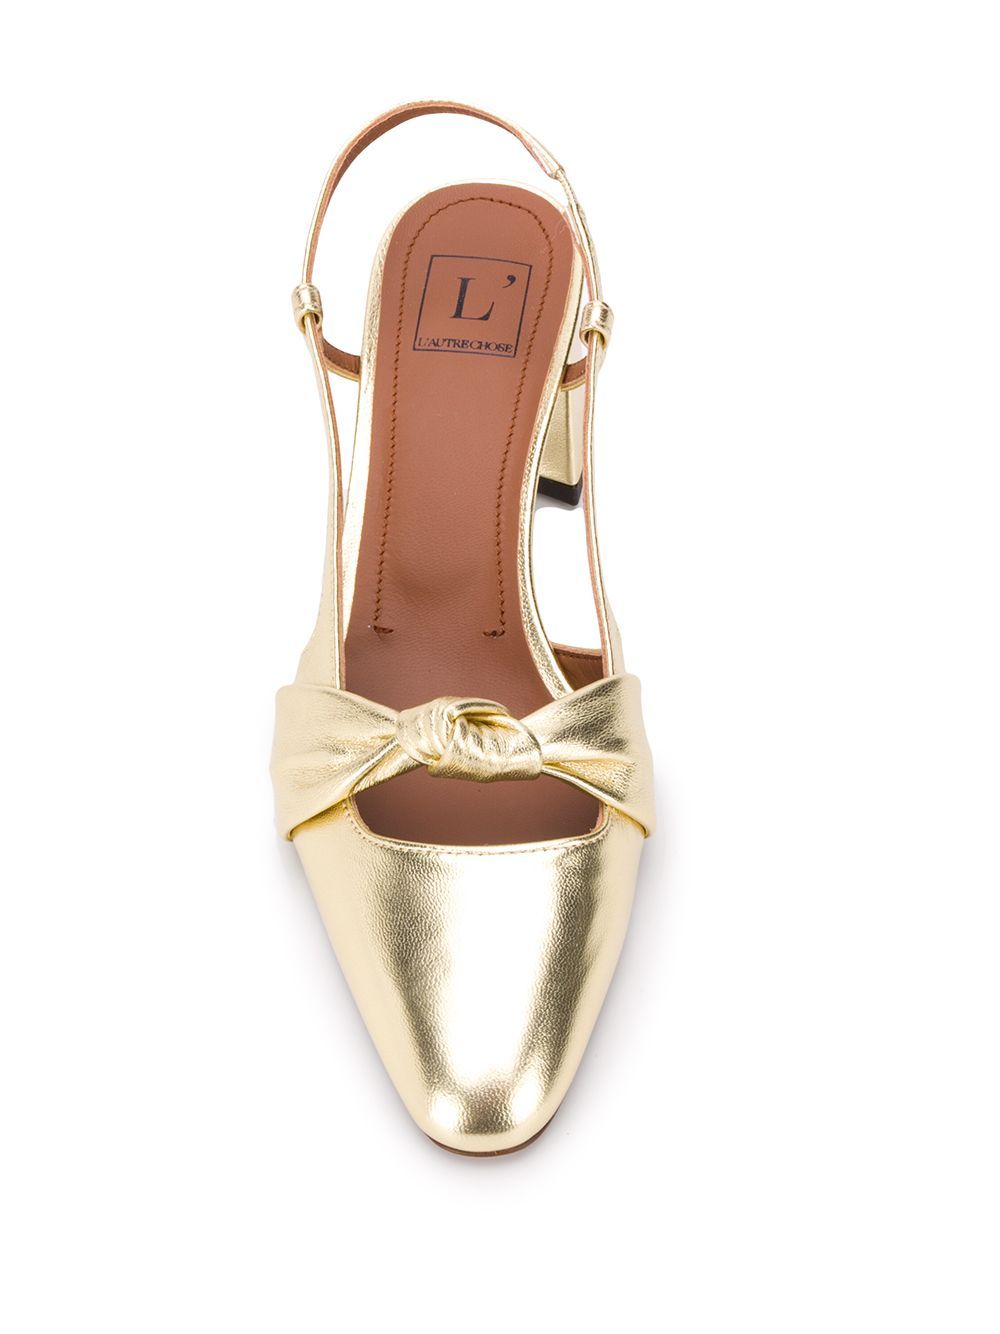 Gold Leather Slingback Shoes Heels LDL039.60CP29145003 - 5